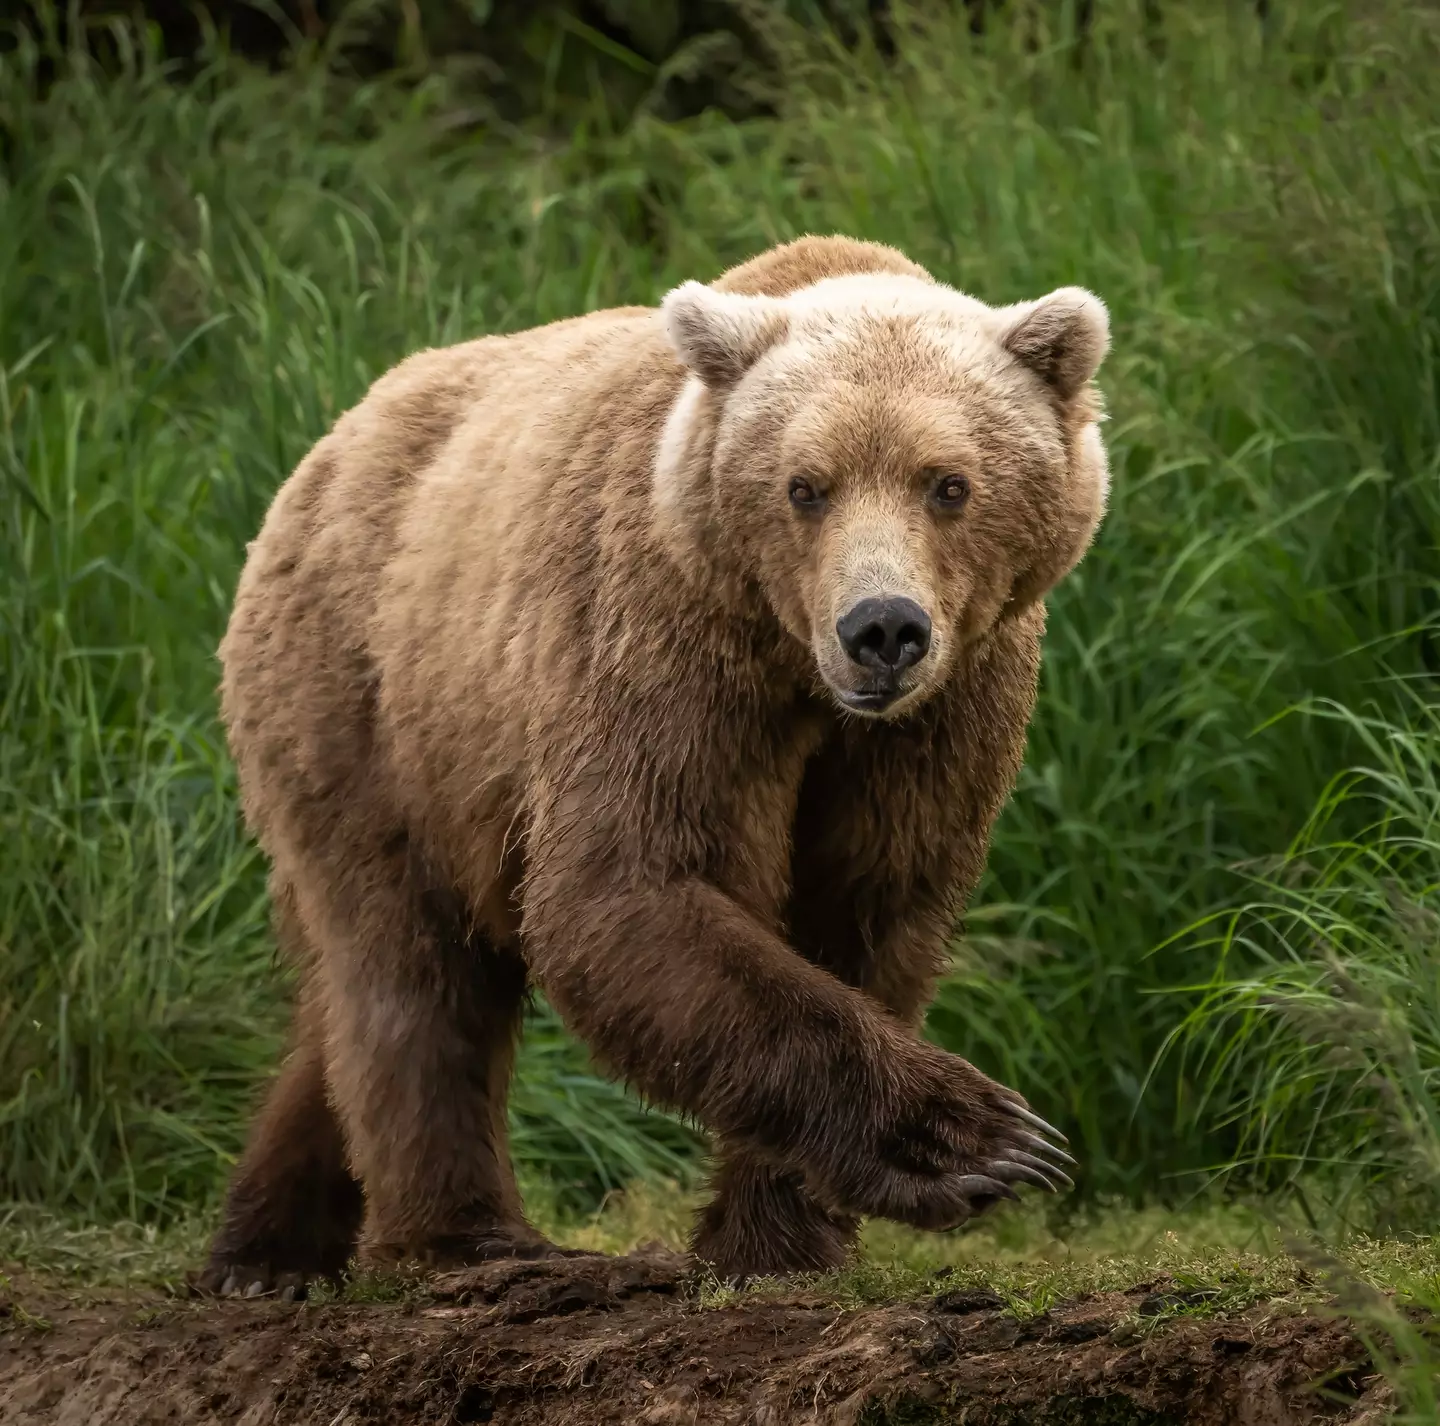 Timothy was nicknamed the ‘Grizzly Man’ due to his love of bears. (Laura Hedien/Getty Images)